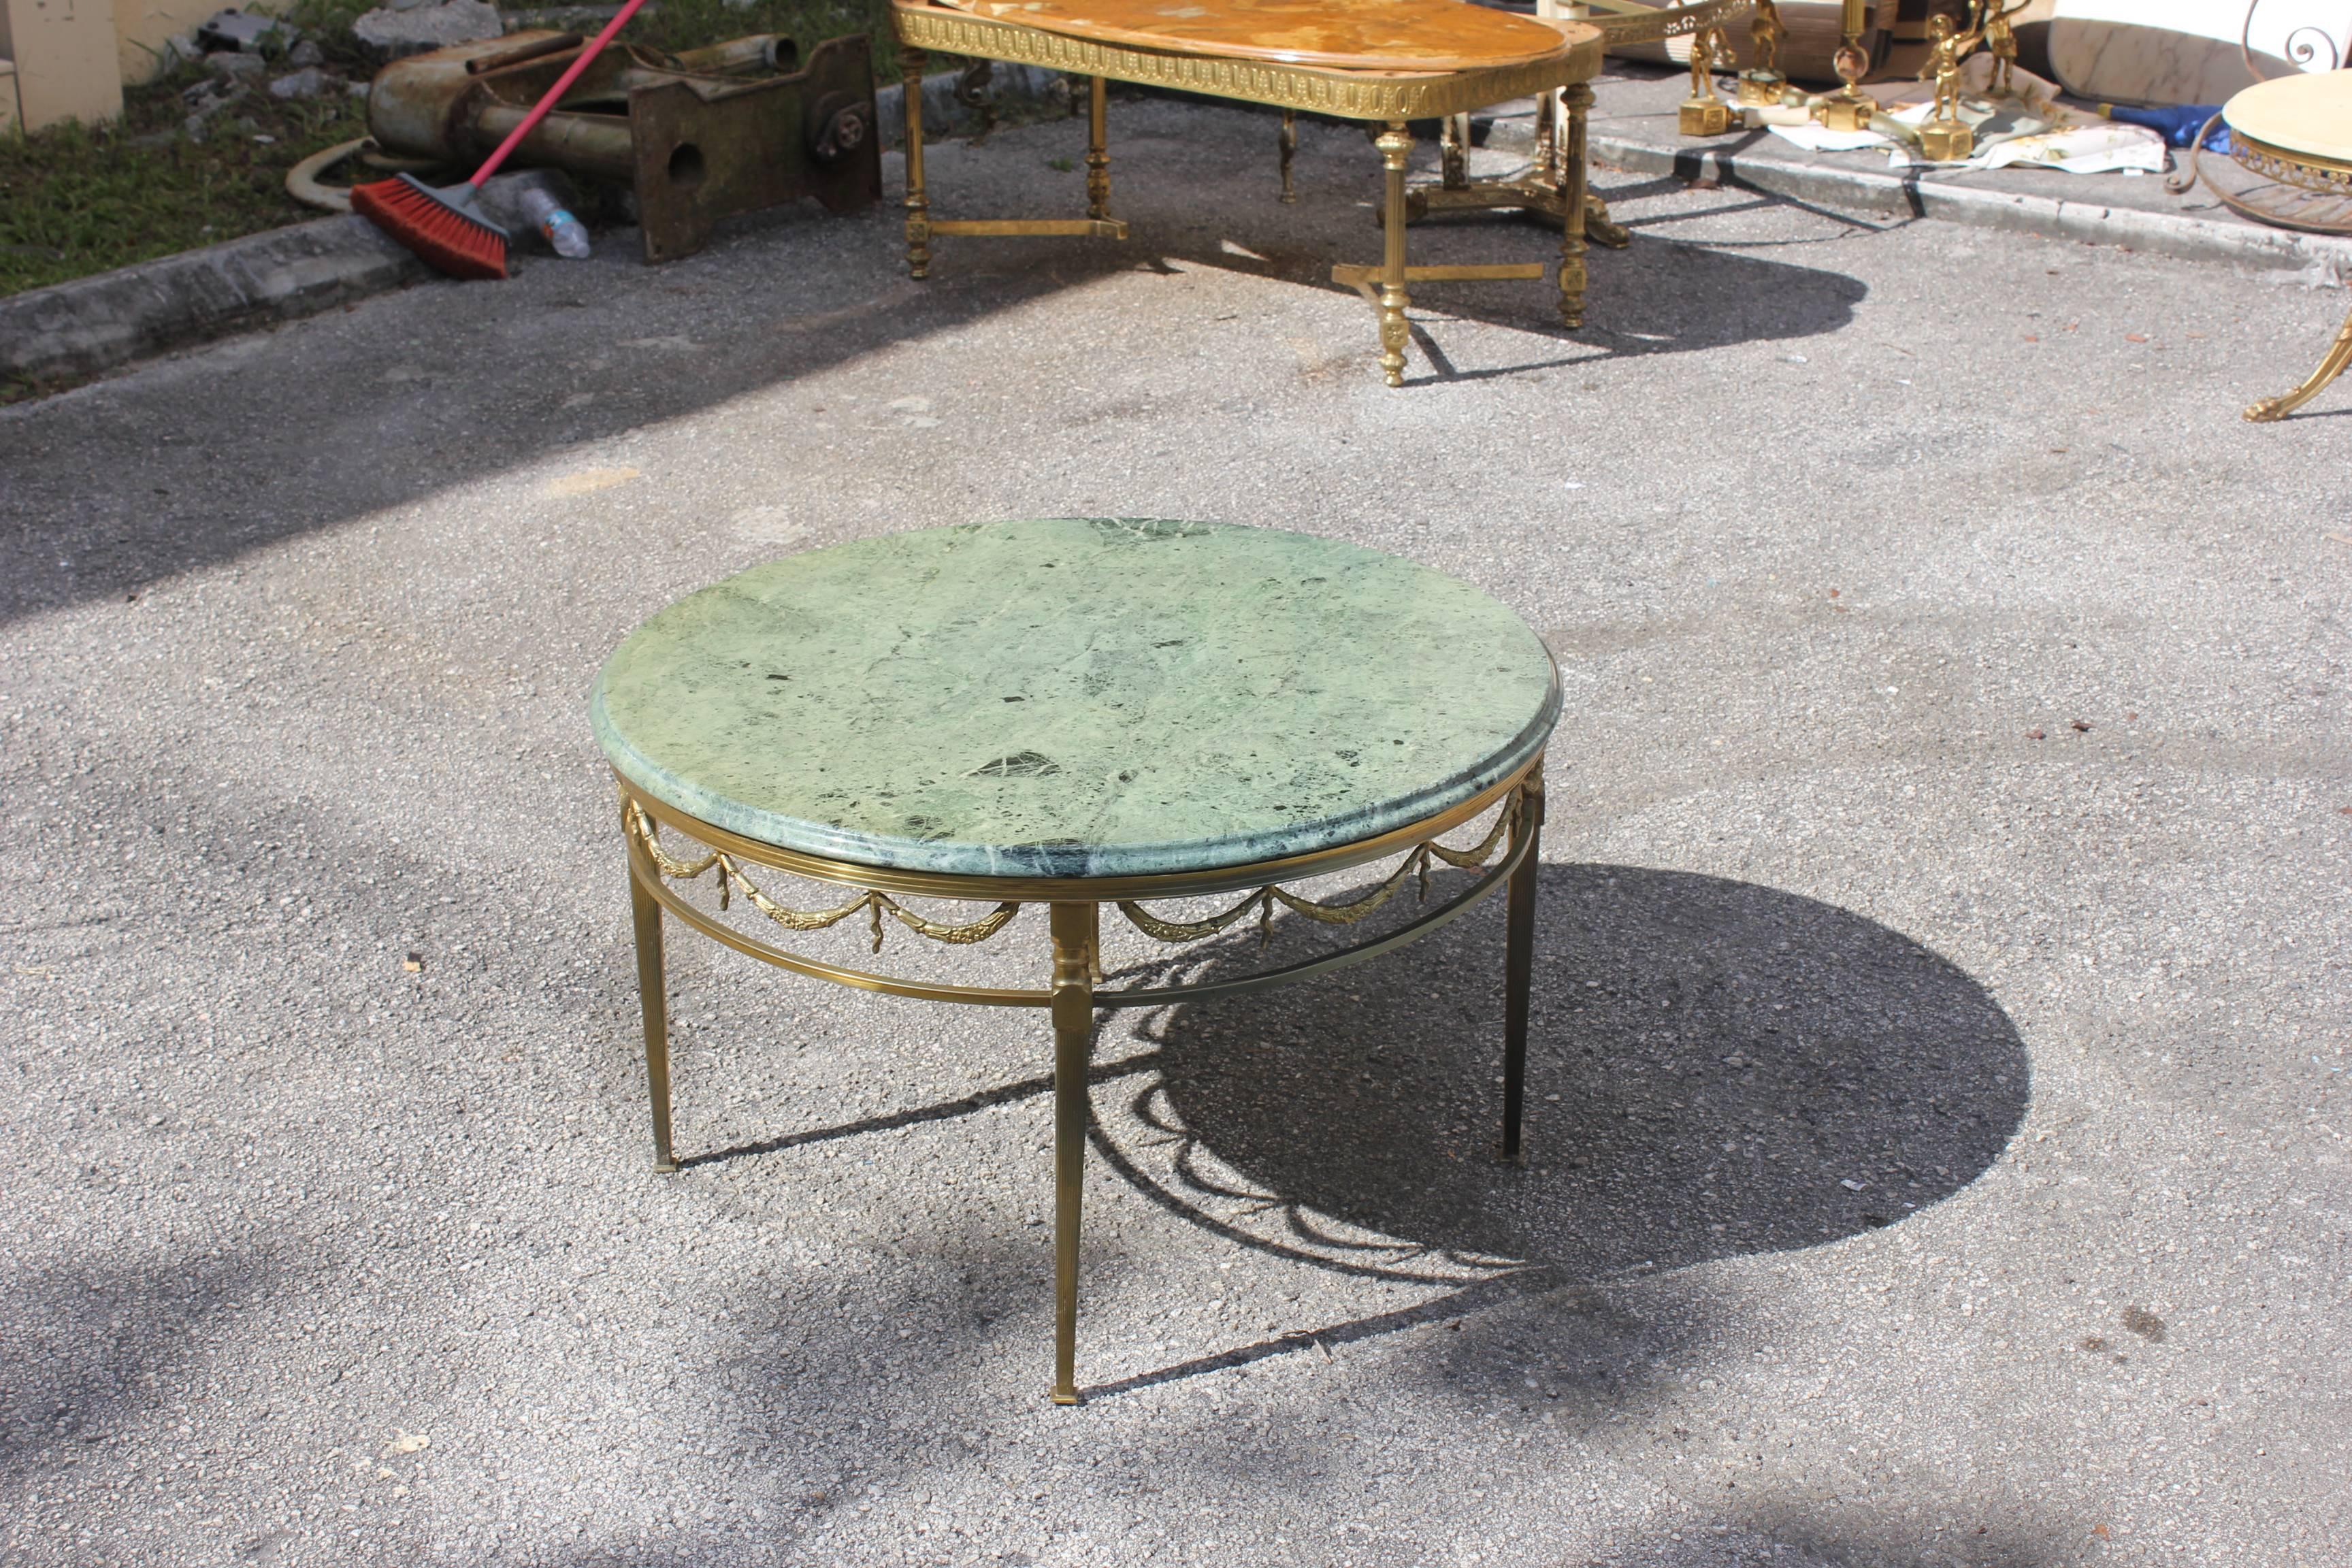 Beautiful Maison Jansen round coffee or cocktail table bronze with green color marble top circa 1940s. Dimensions: 18.5